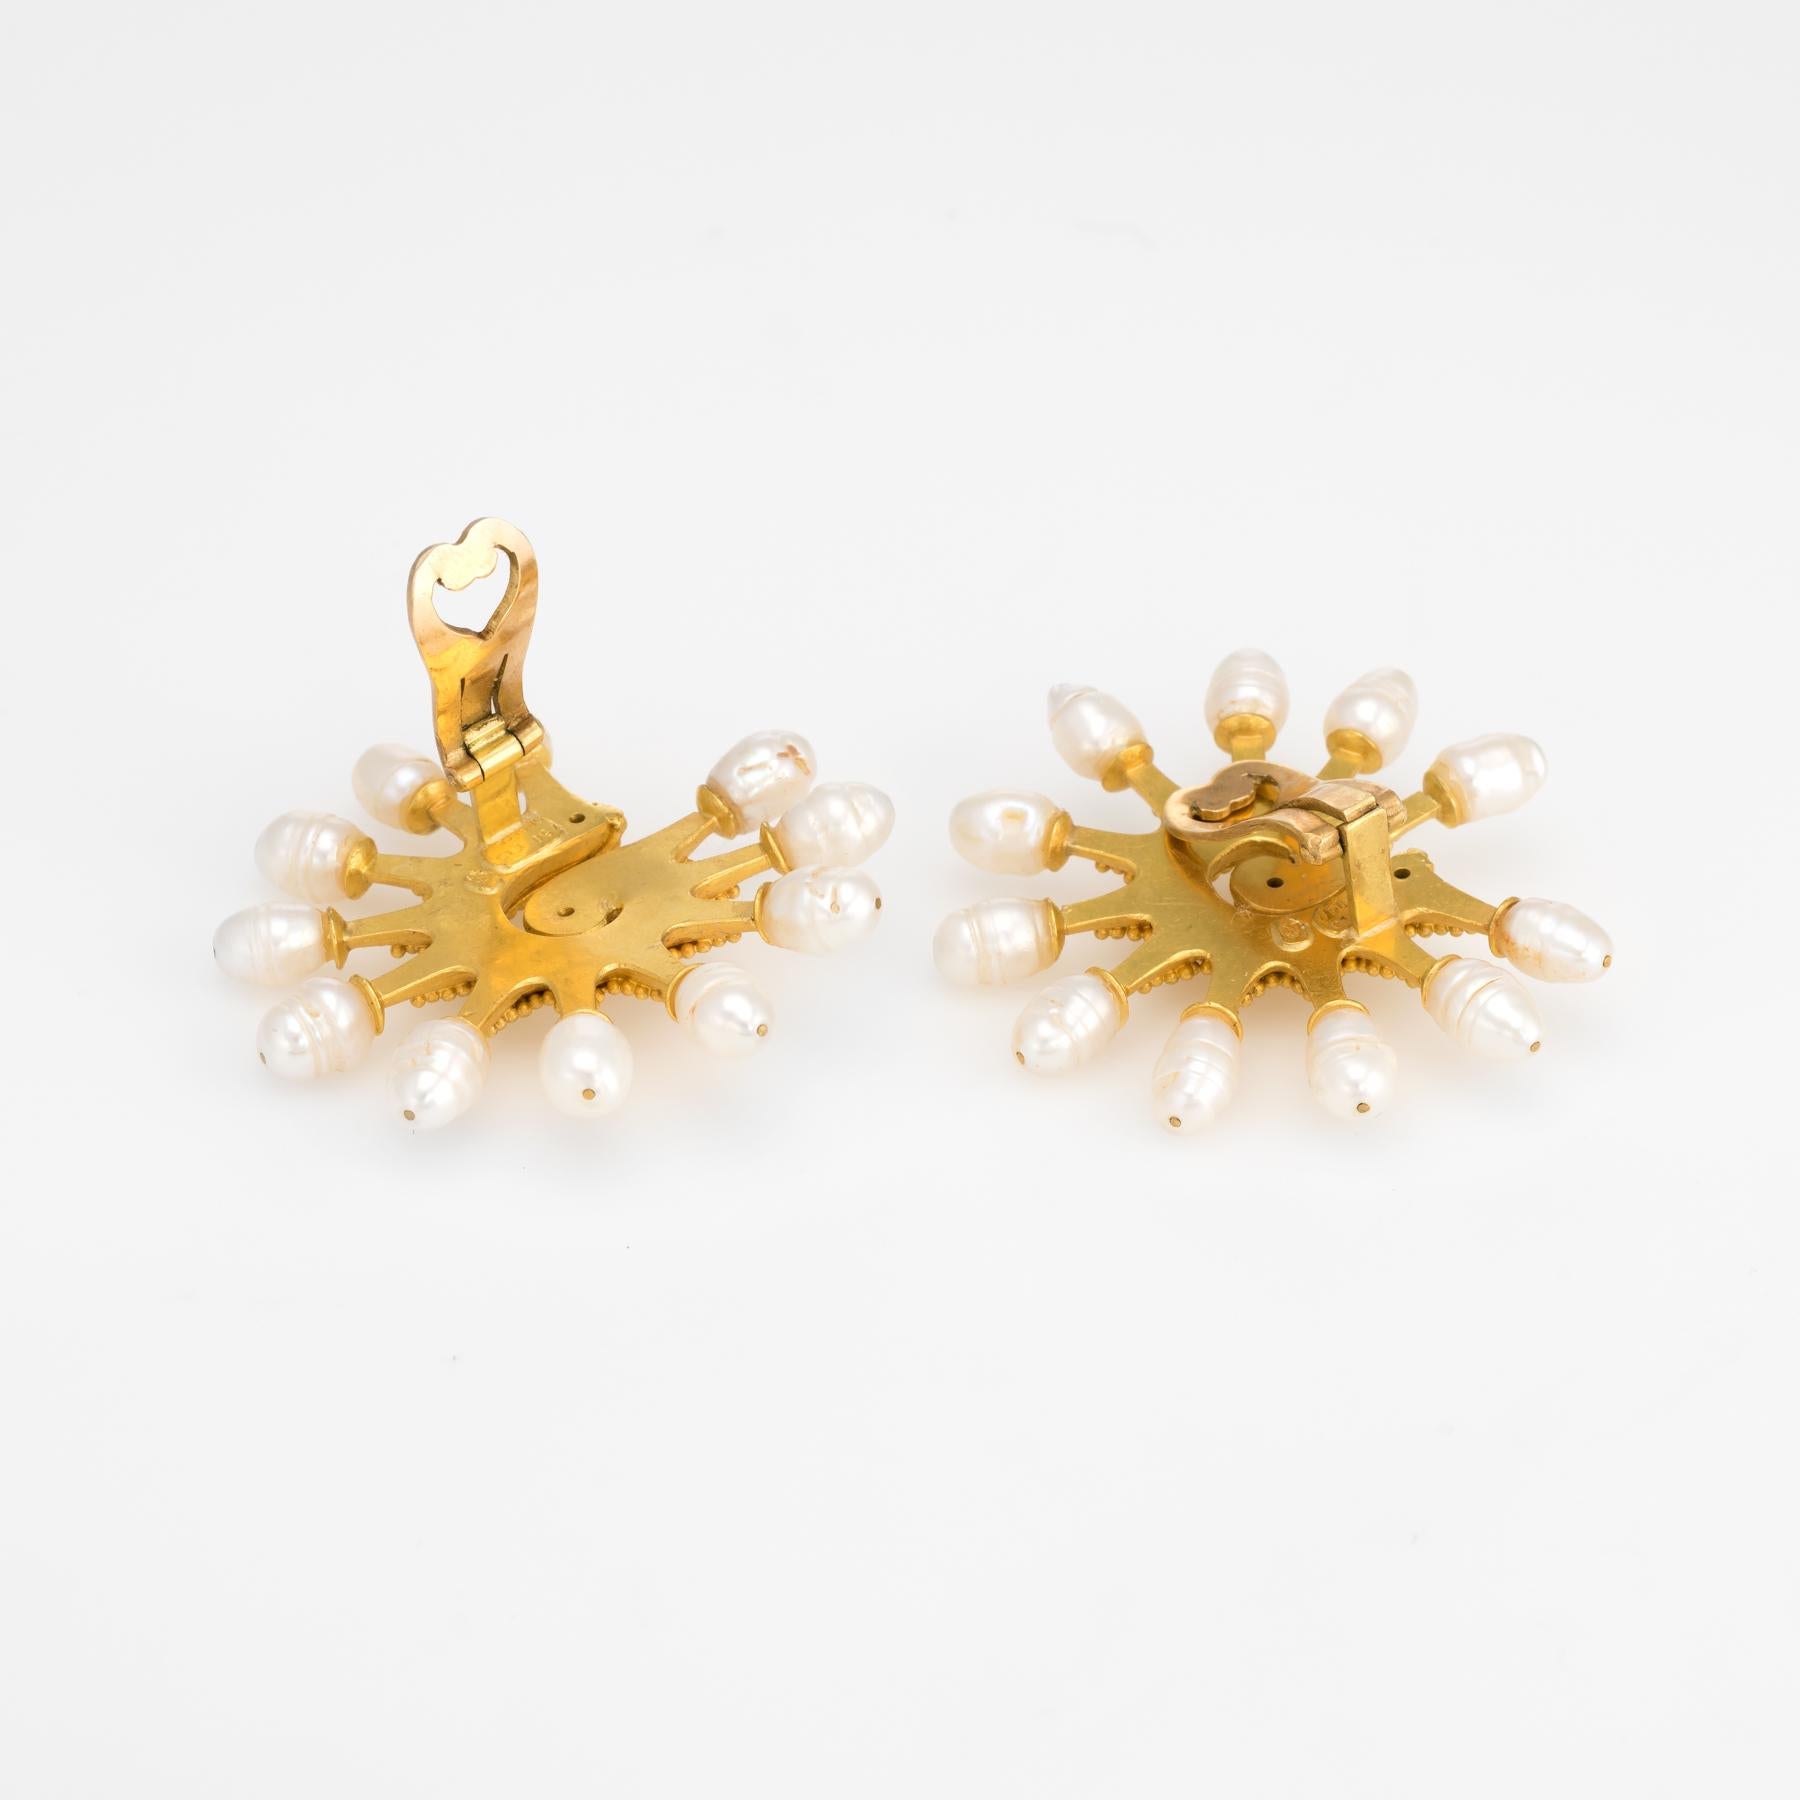 Elegant & finely detailed pair of estate Ilias Lalaounis earrings, crafted in 18 karat yellow gold. 

The earrings are set with a spoke wheel of glossy freshwater pearls measuring (average) 7mm x 5mm. The pearls are well matching with light